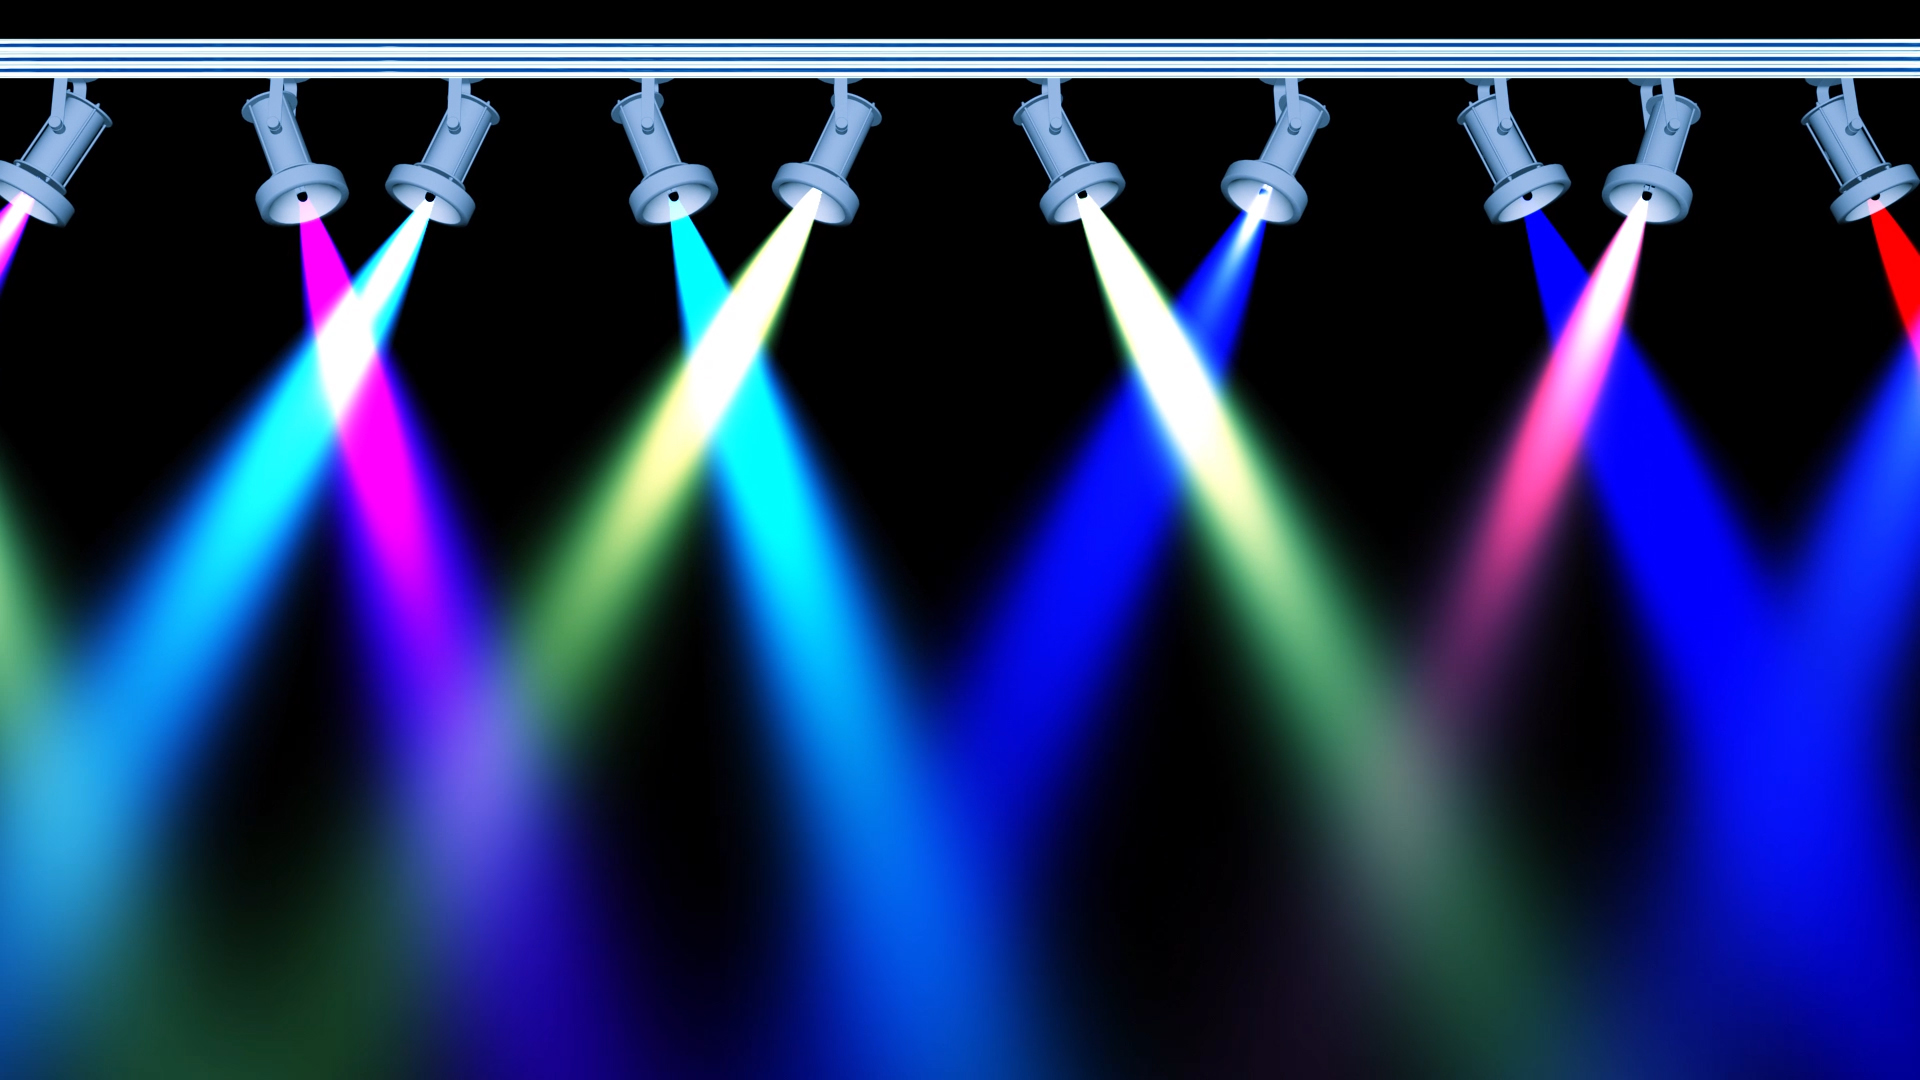 Concert Stage 10 Lights Loop with Different Colours Animation in Black  Screen Background Effects | All Design Creative